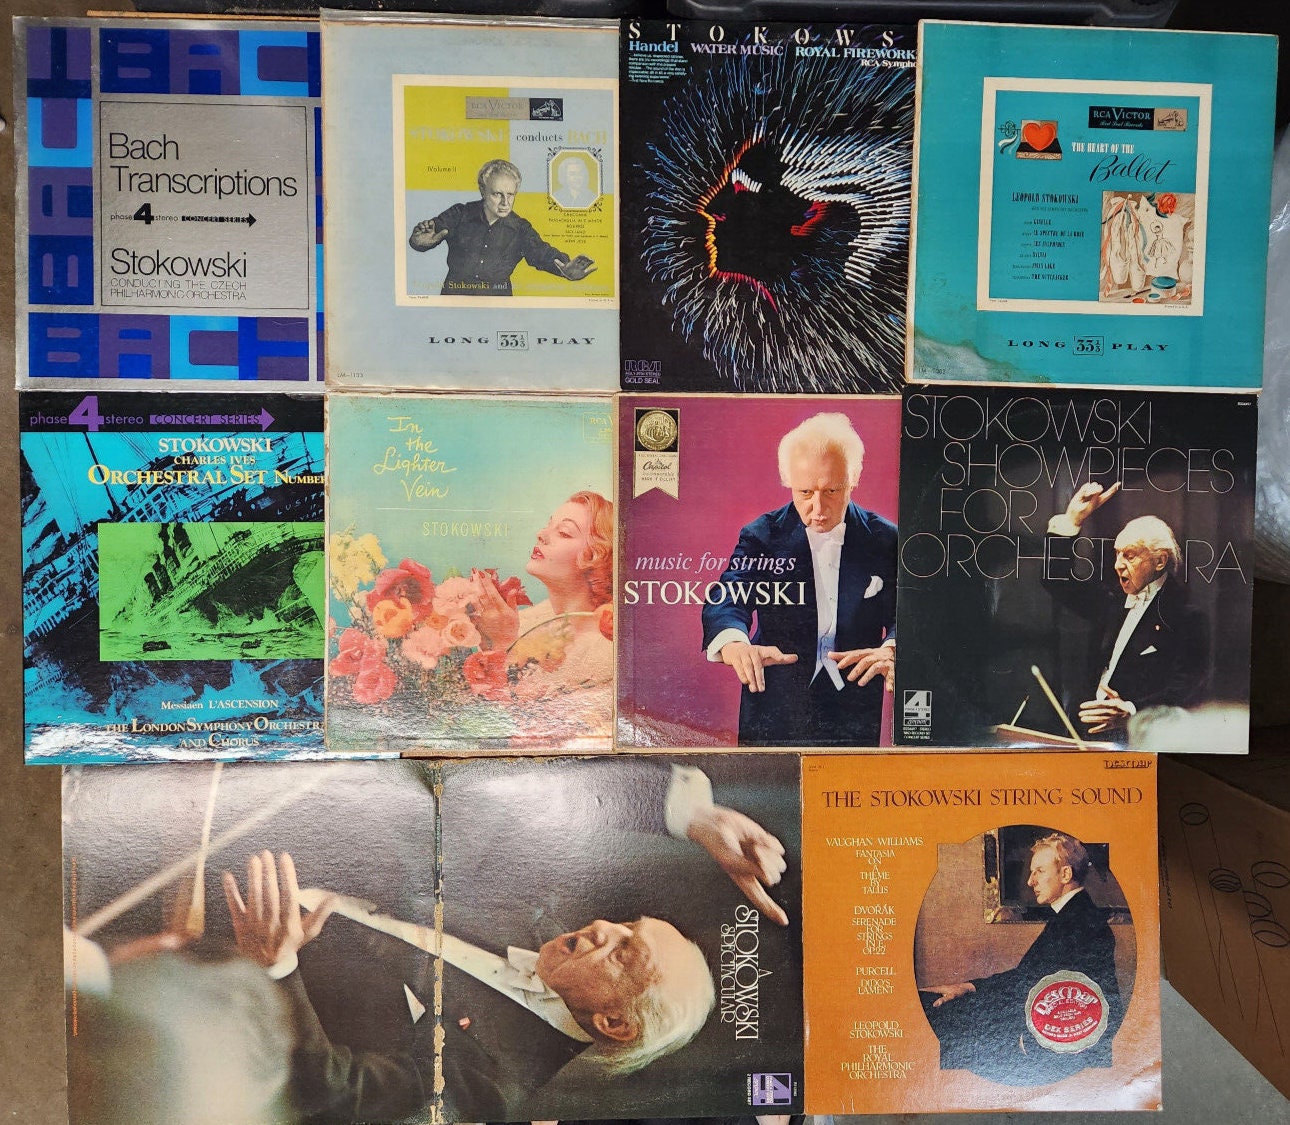 Lot of 10 Lps Leopold Stokowski Bach Chopin Delibes 